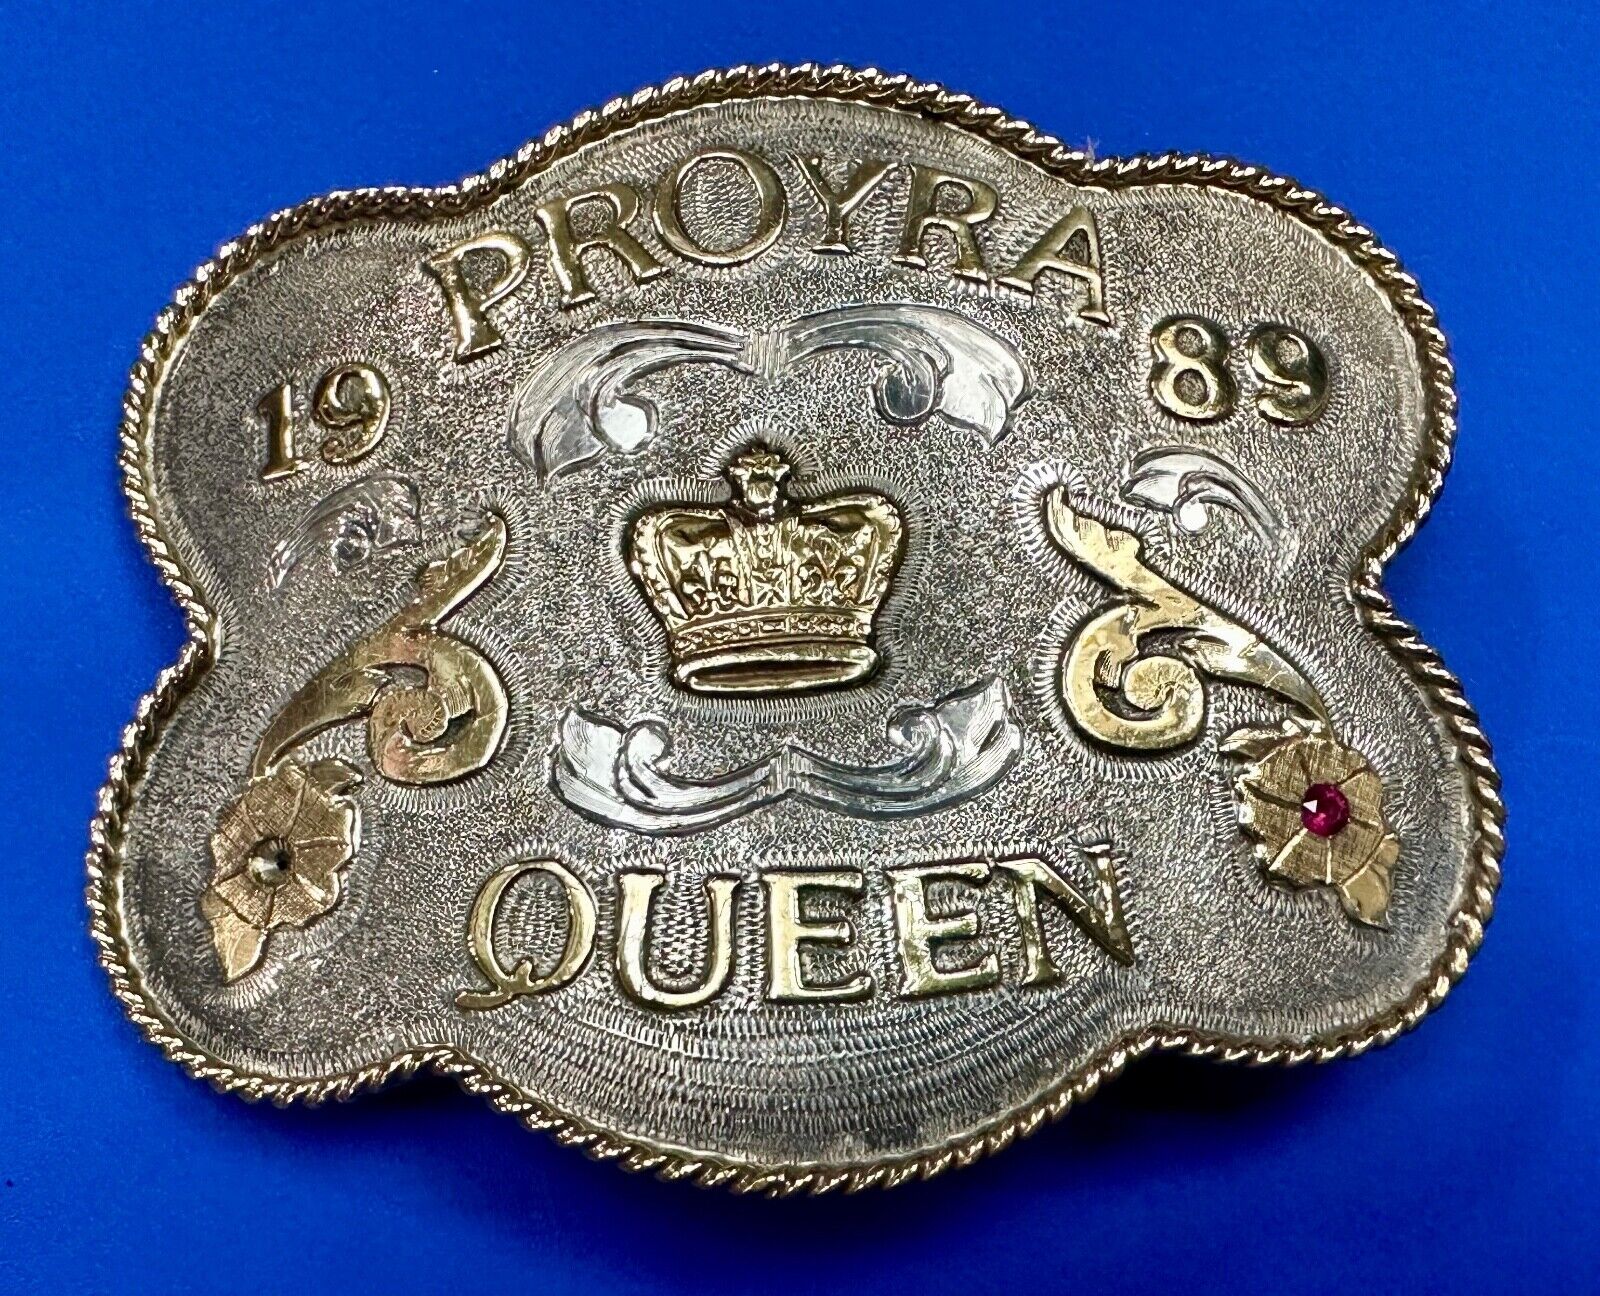 Large Pro Yra Queen 1989 Rodeo Trophy Award ornate ruby accented belt buckle